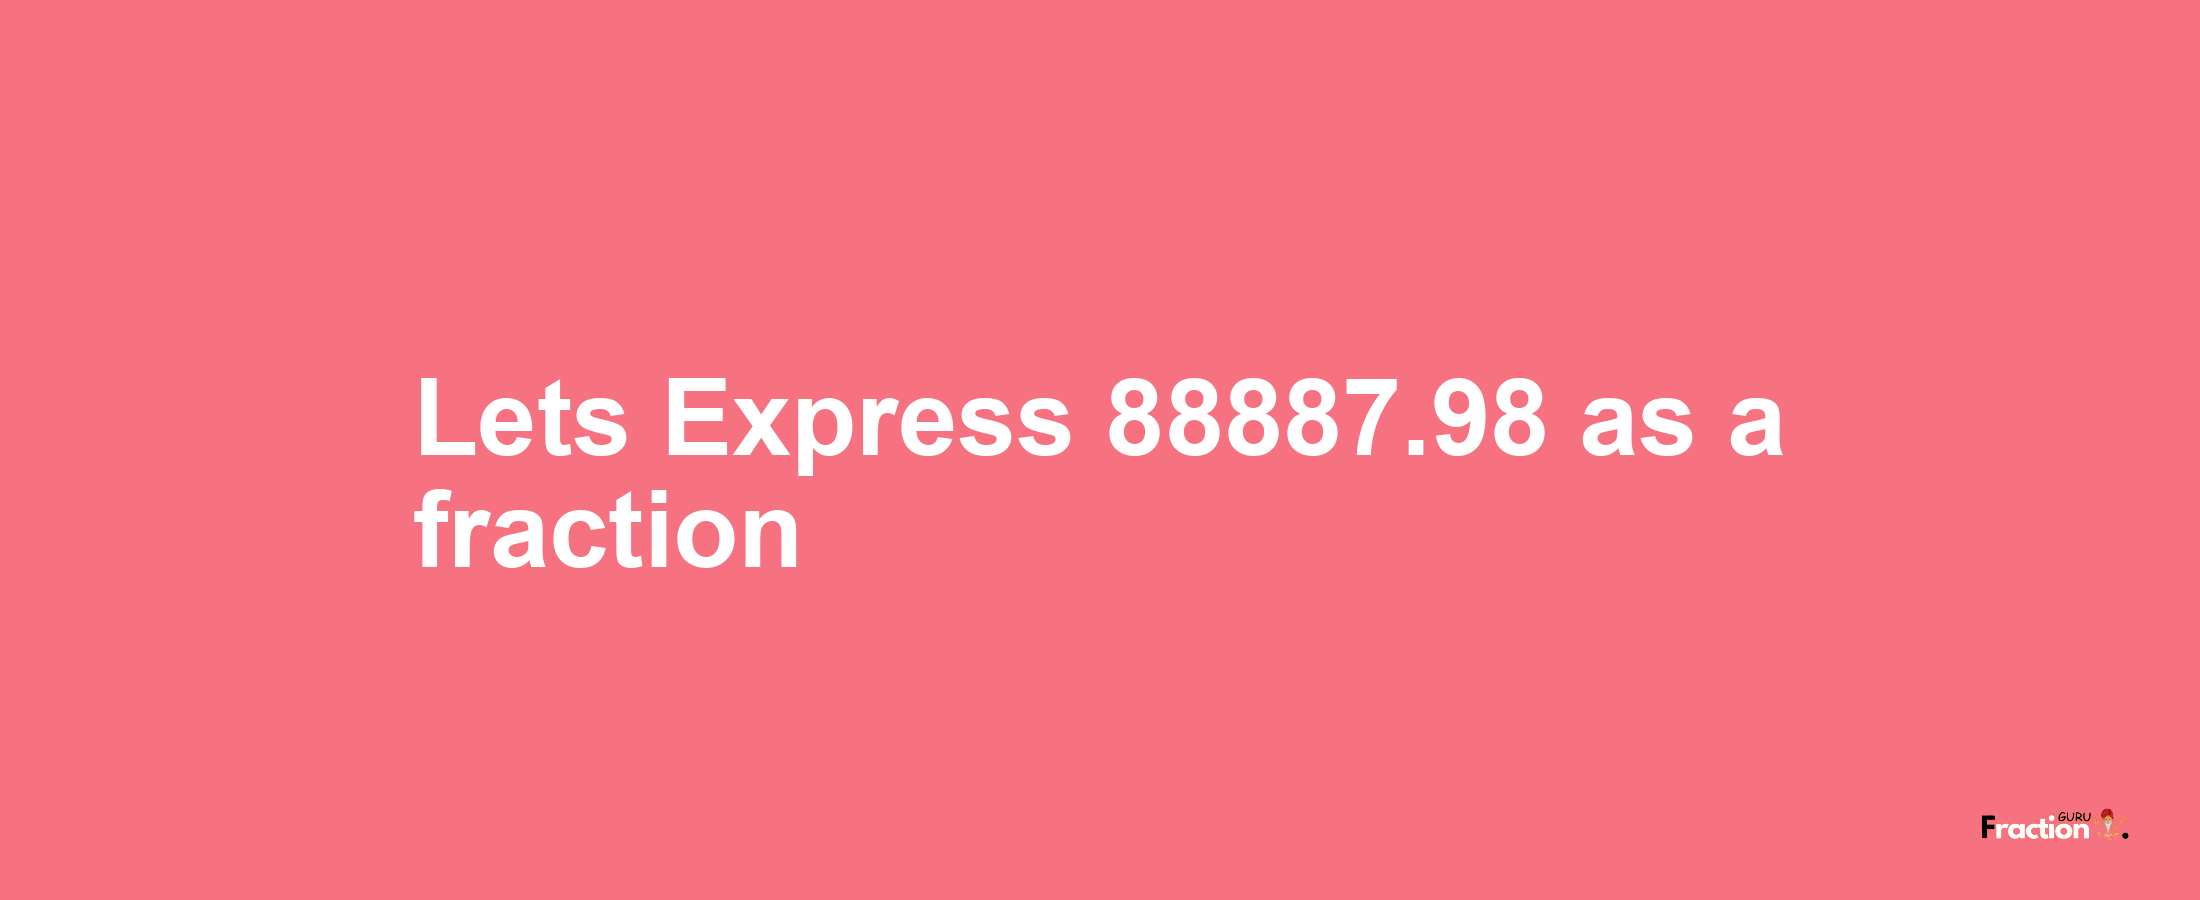 Lets Express 88887.98 as afraction